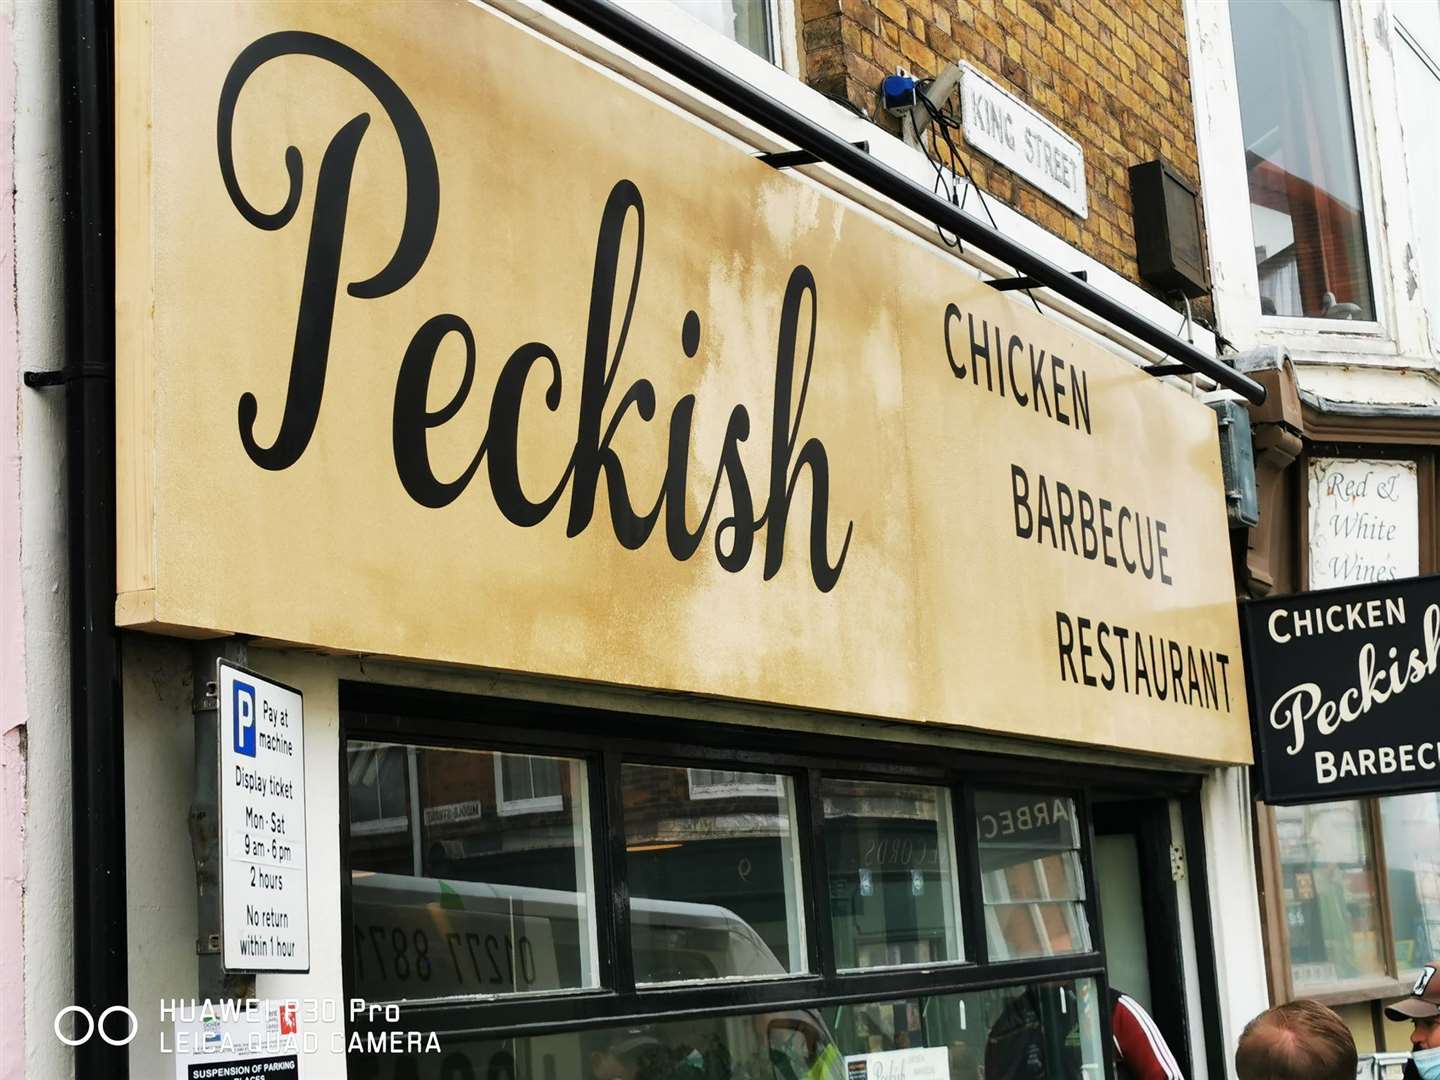 Pekish Chicken shop gets to keep its name, but its sign needed the 70s touch